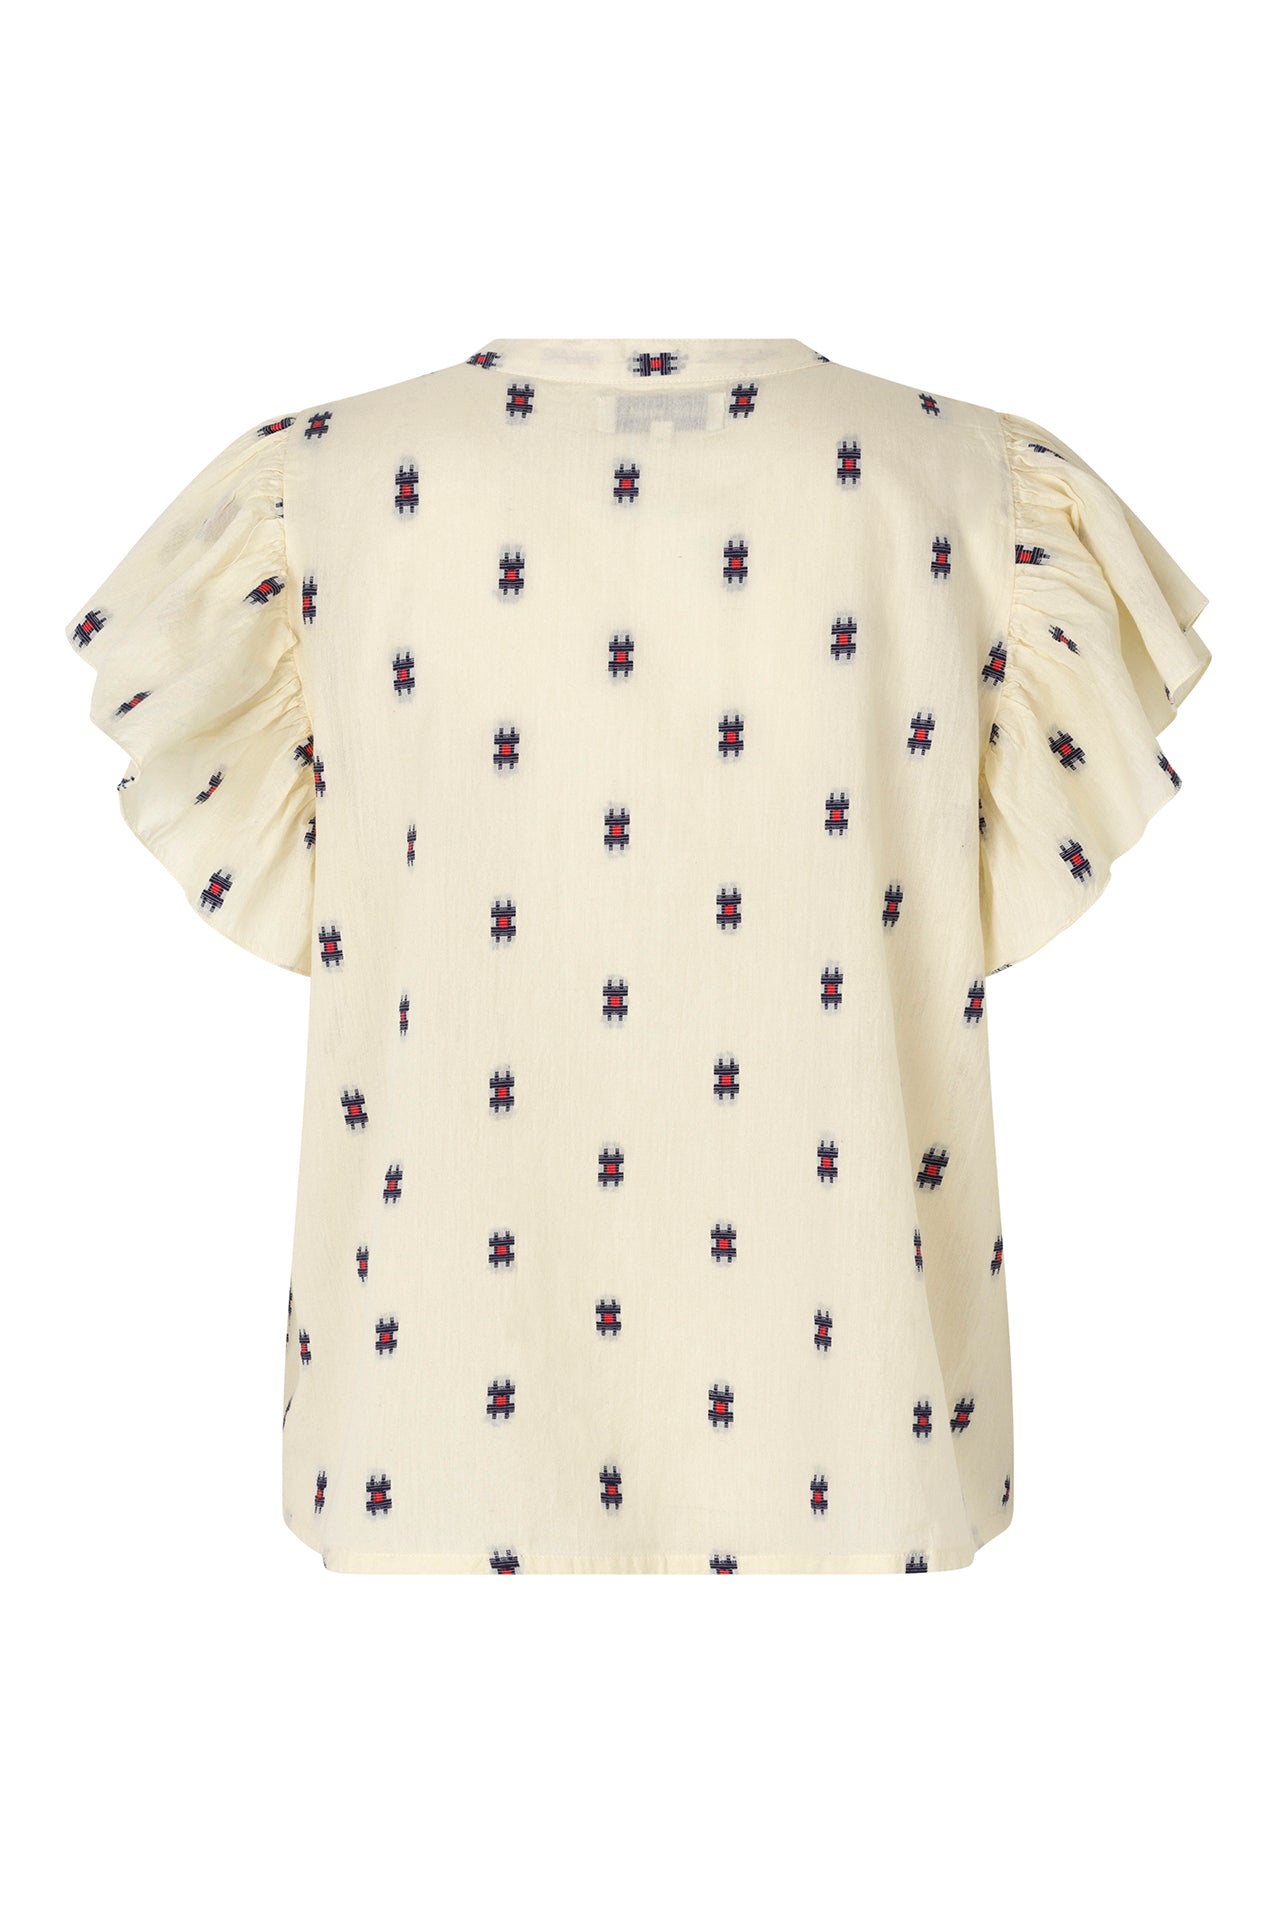 Lollys Laundry IsabelLL Top SL T-shirt 02 Creme